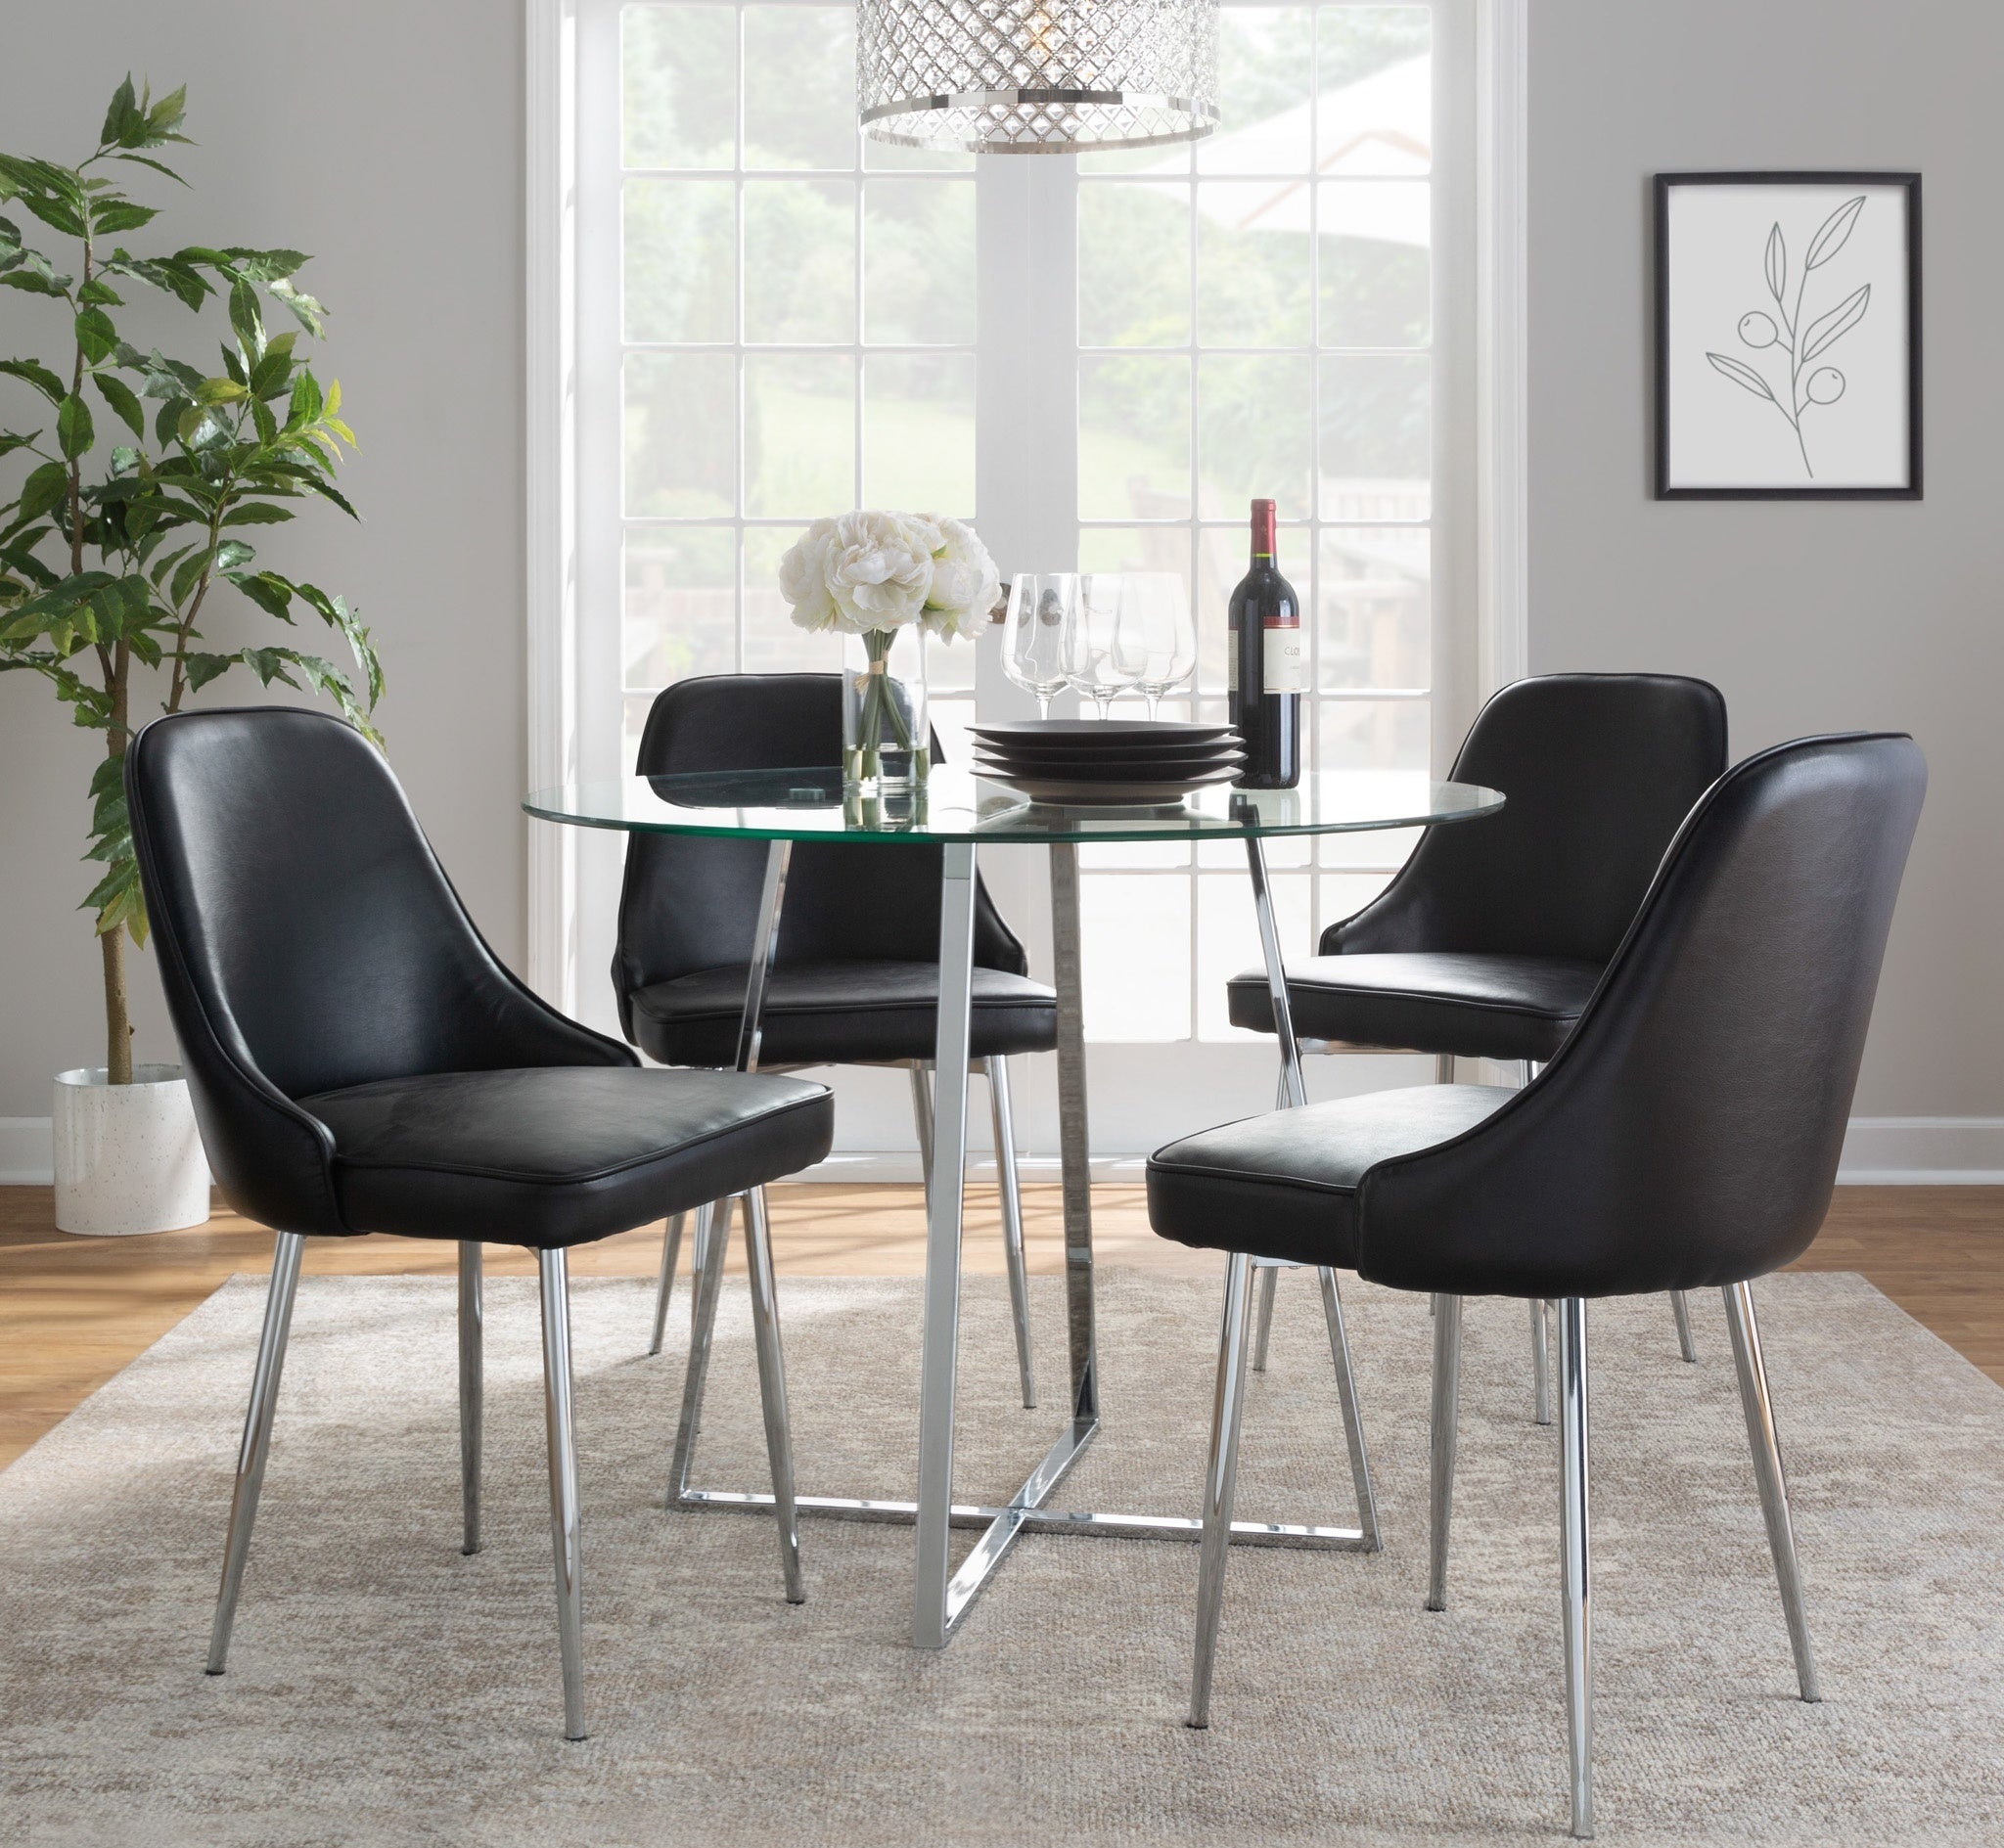 Contemporary Dining Chair with Chrome Frame and Black Faux Leather (Set of 2)